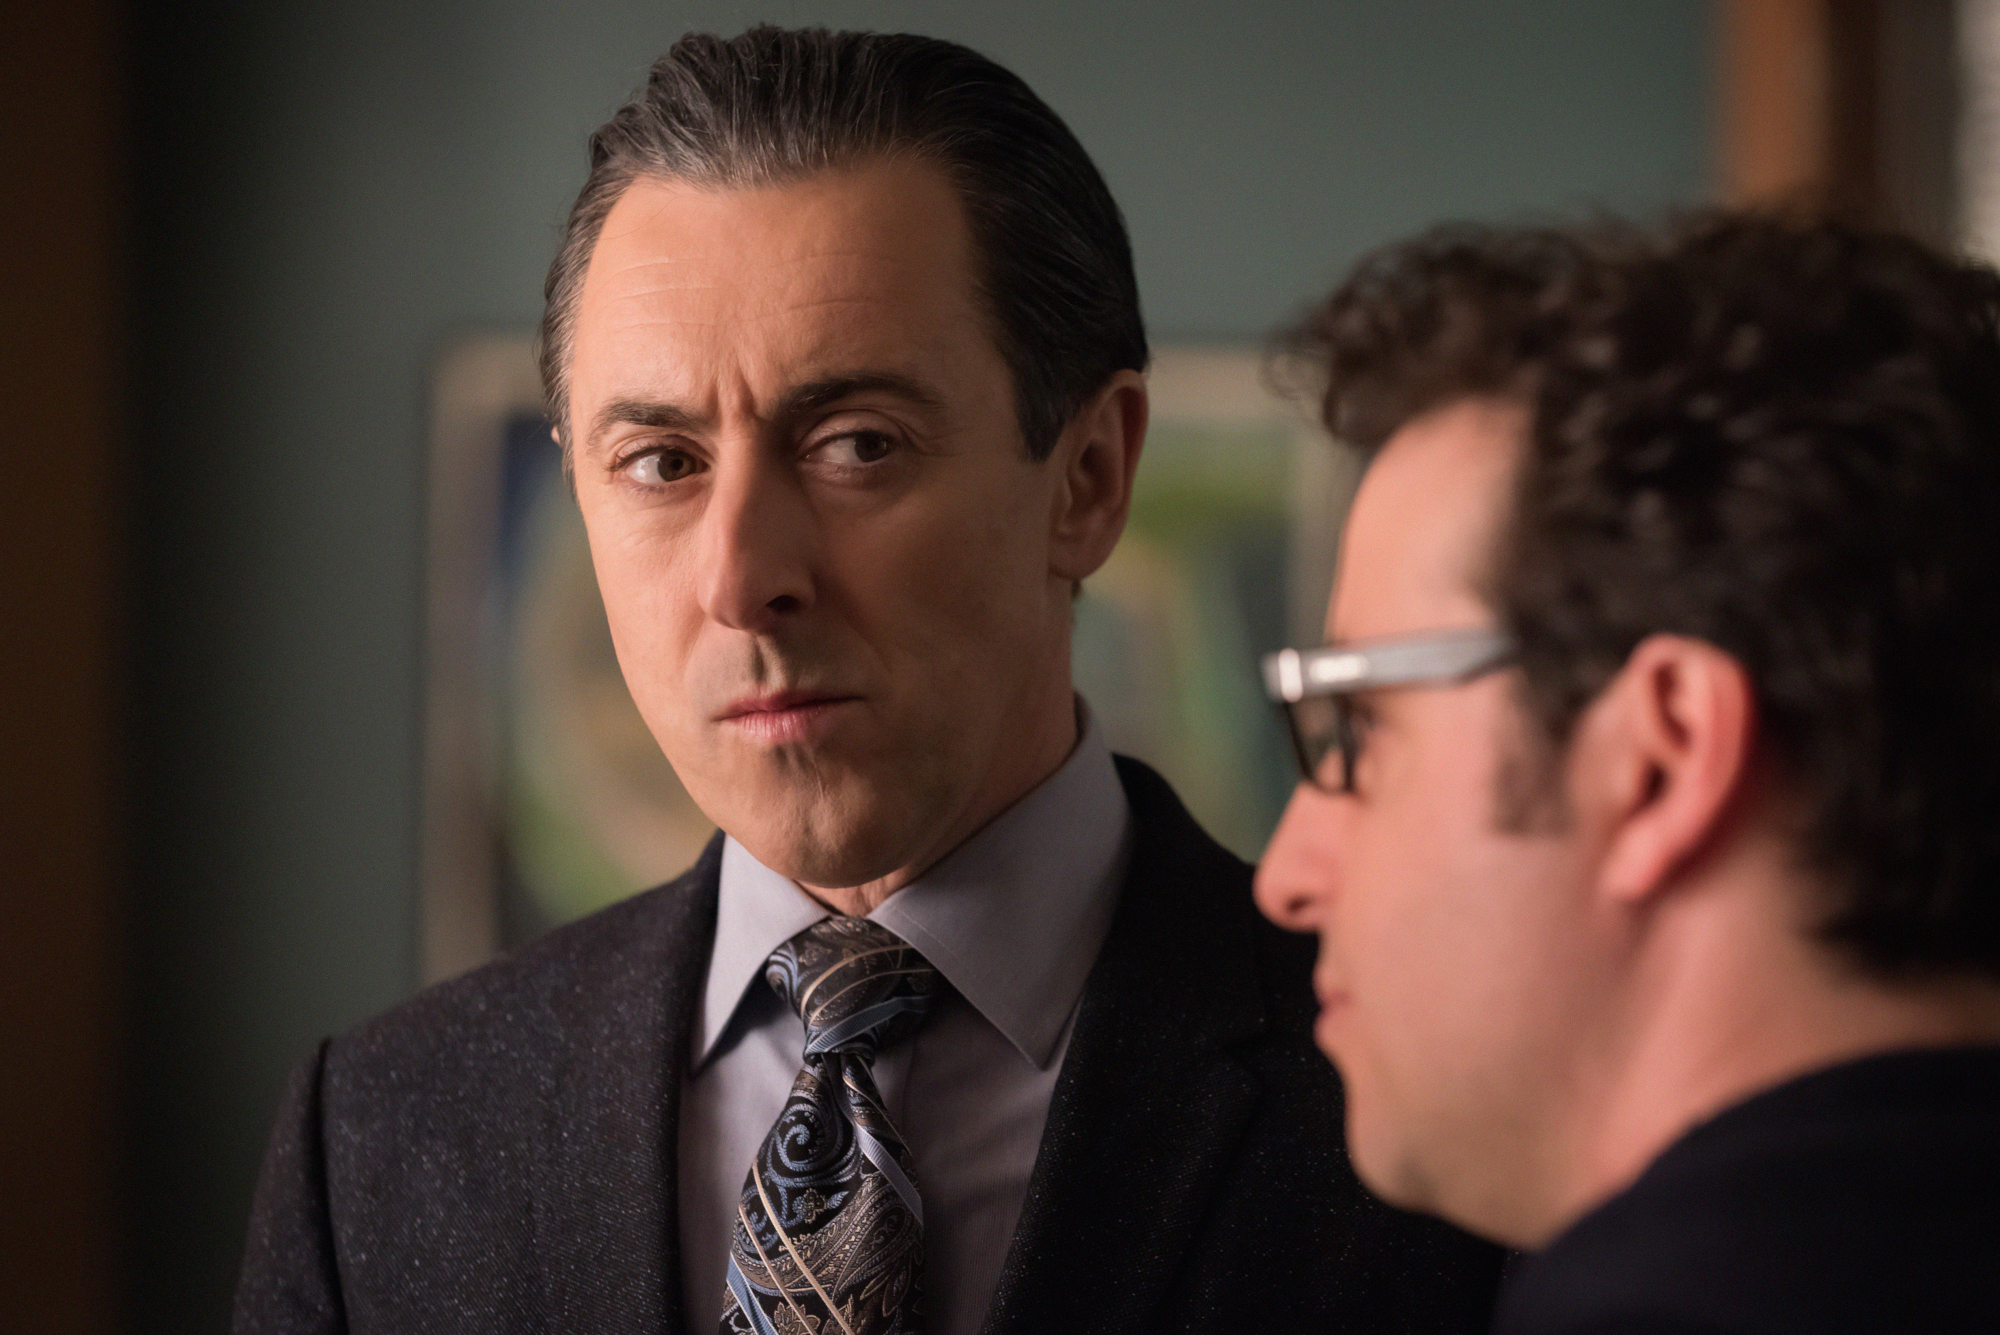 'The Good Fight': Alan Cumming to Guest Star as Eli Gold in Season 6